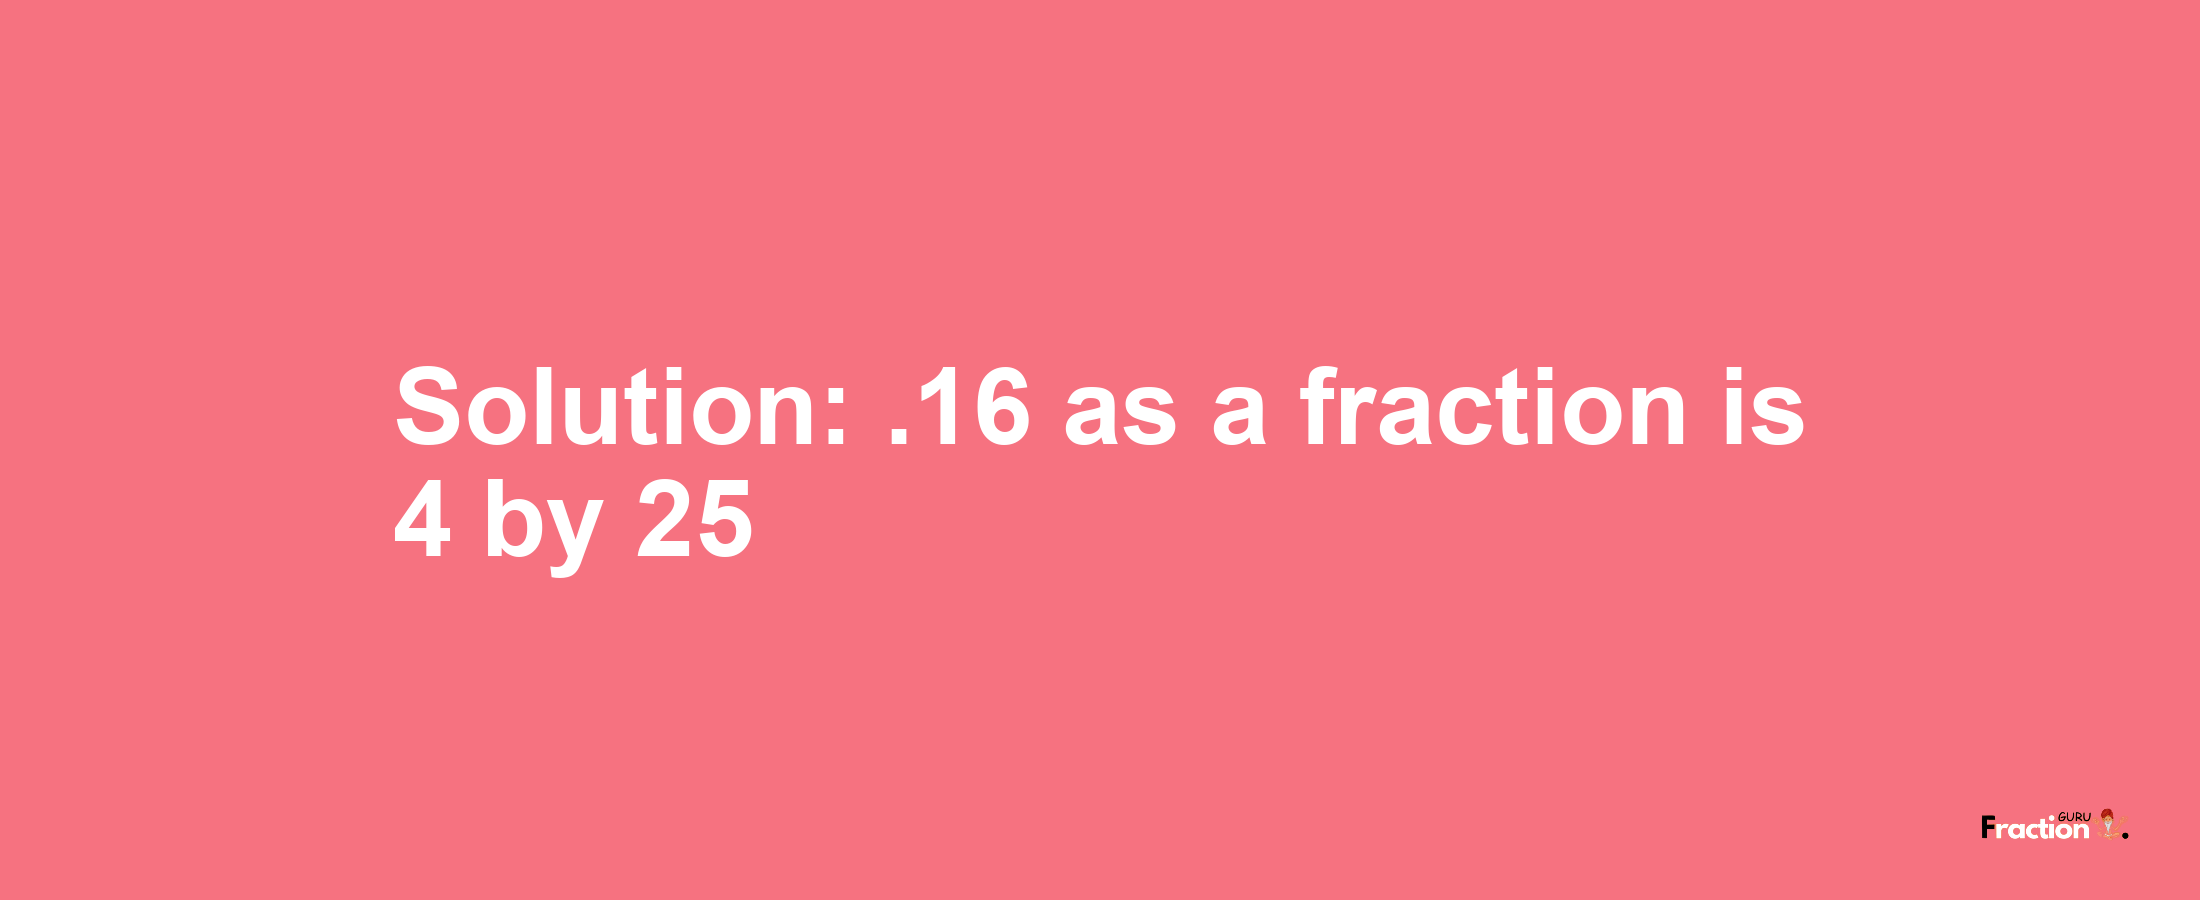 Solution:.16 as a fraction is 4/25